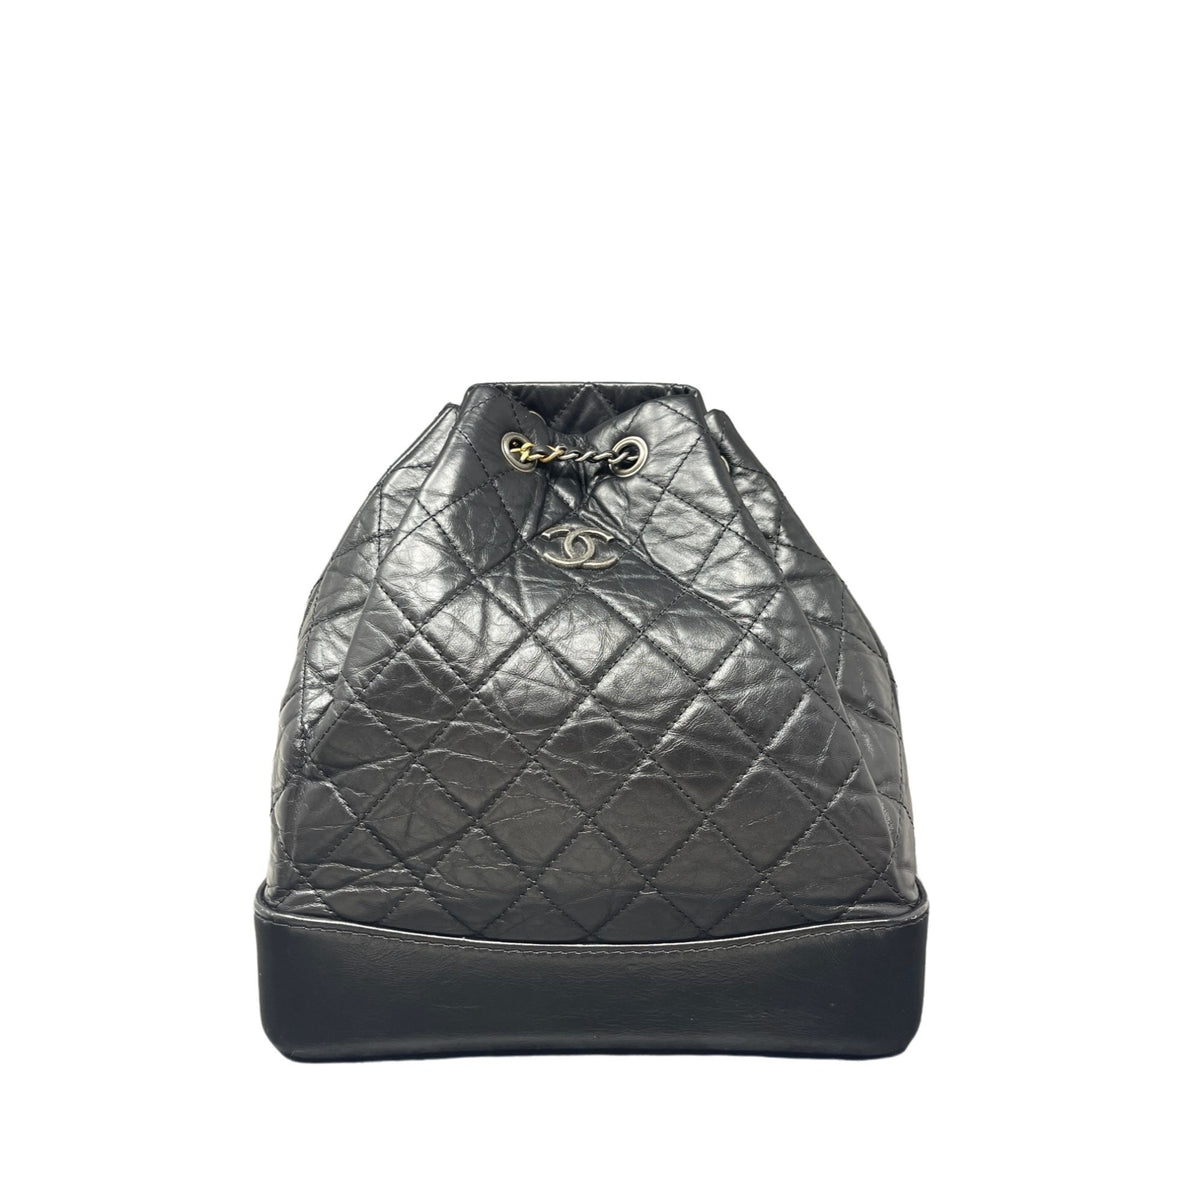 CHANEL, Bags, Chanel Chanel Aged Calfskin Quilted Small Gabrielle Backpack  Black Black